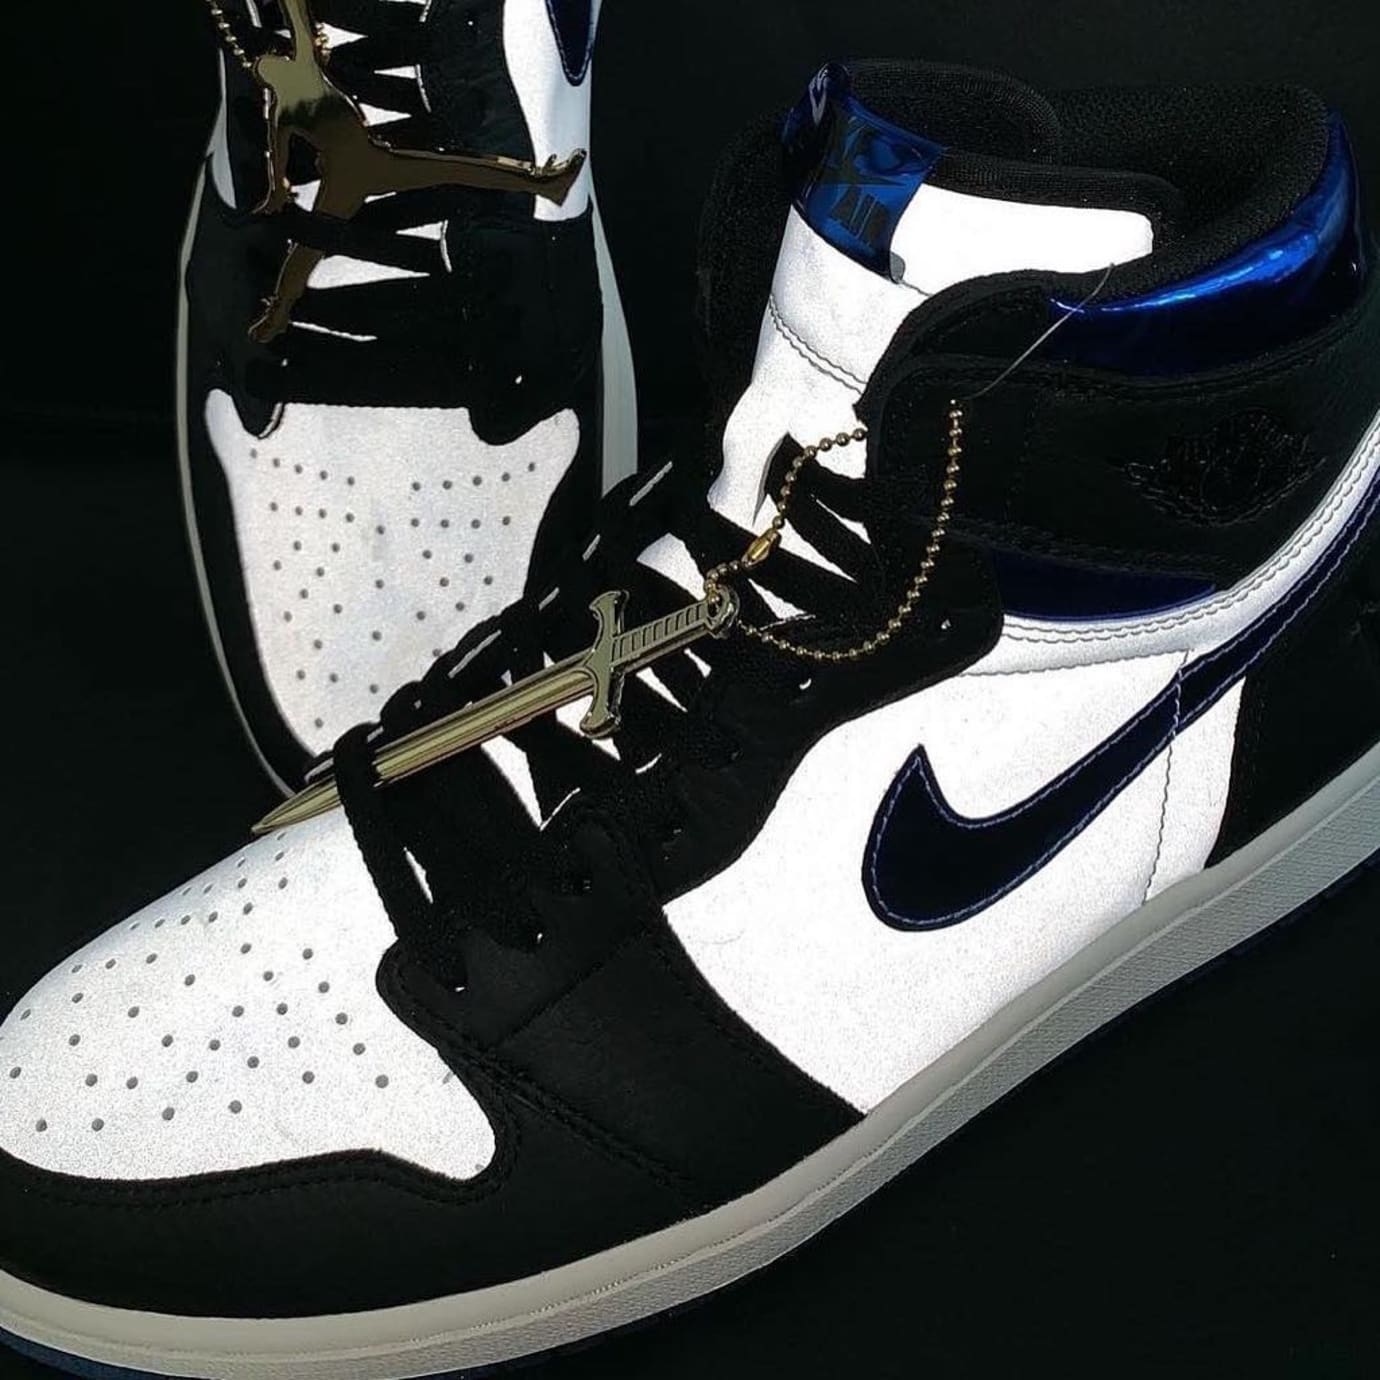 Overskyet Glat Legende Make-a-Wish x Air Jordan 1 for Millad Mesriani Profile | Sole Collector